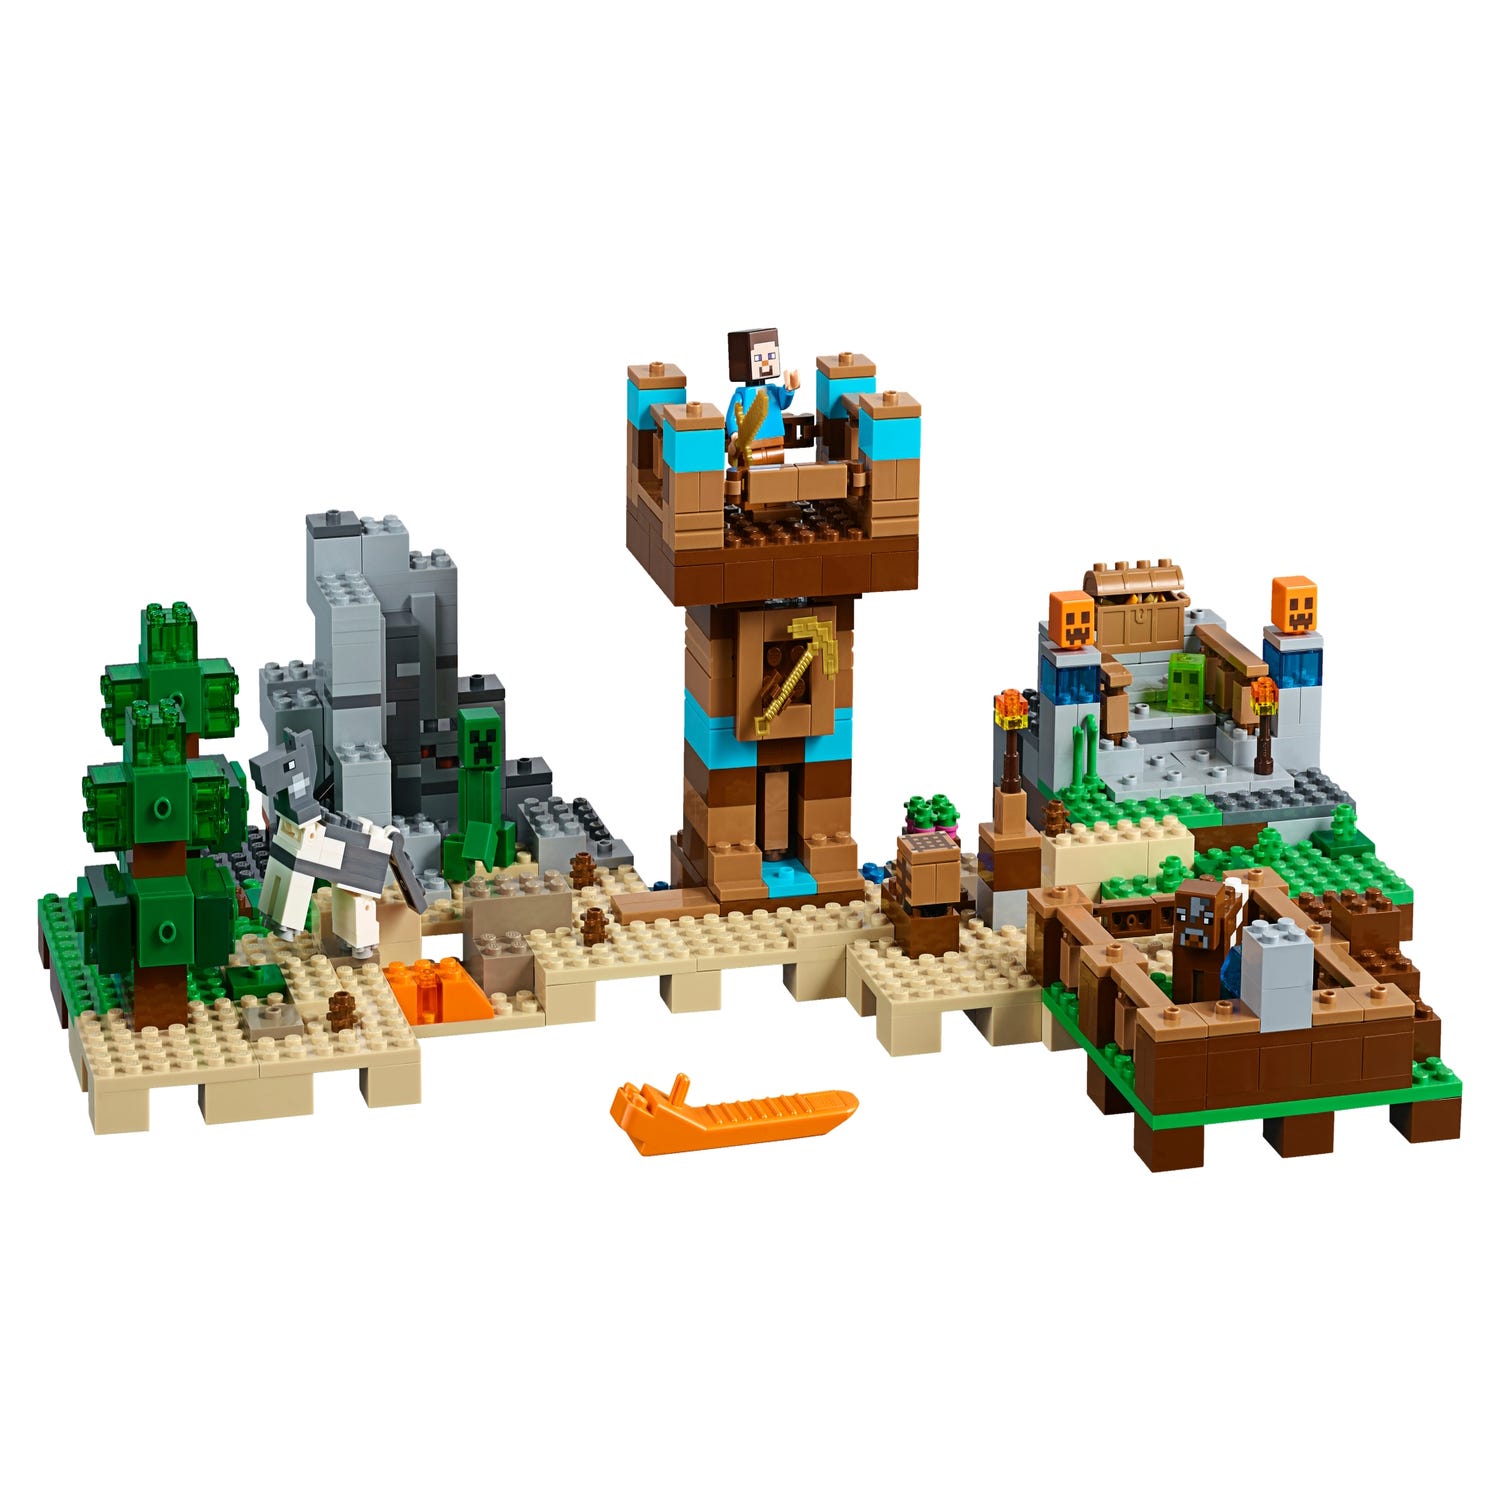 Crafting 2.0 21135 | Minecraft® | Buy online at the LEGO® Shop US